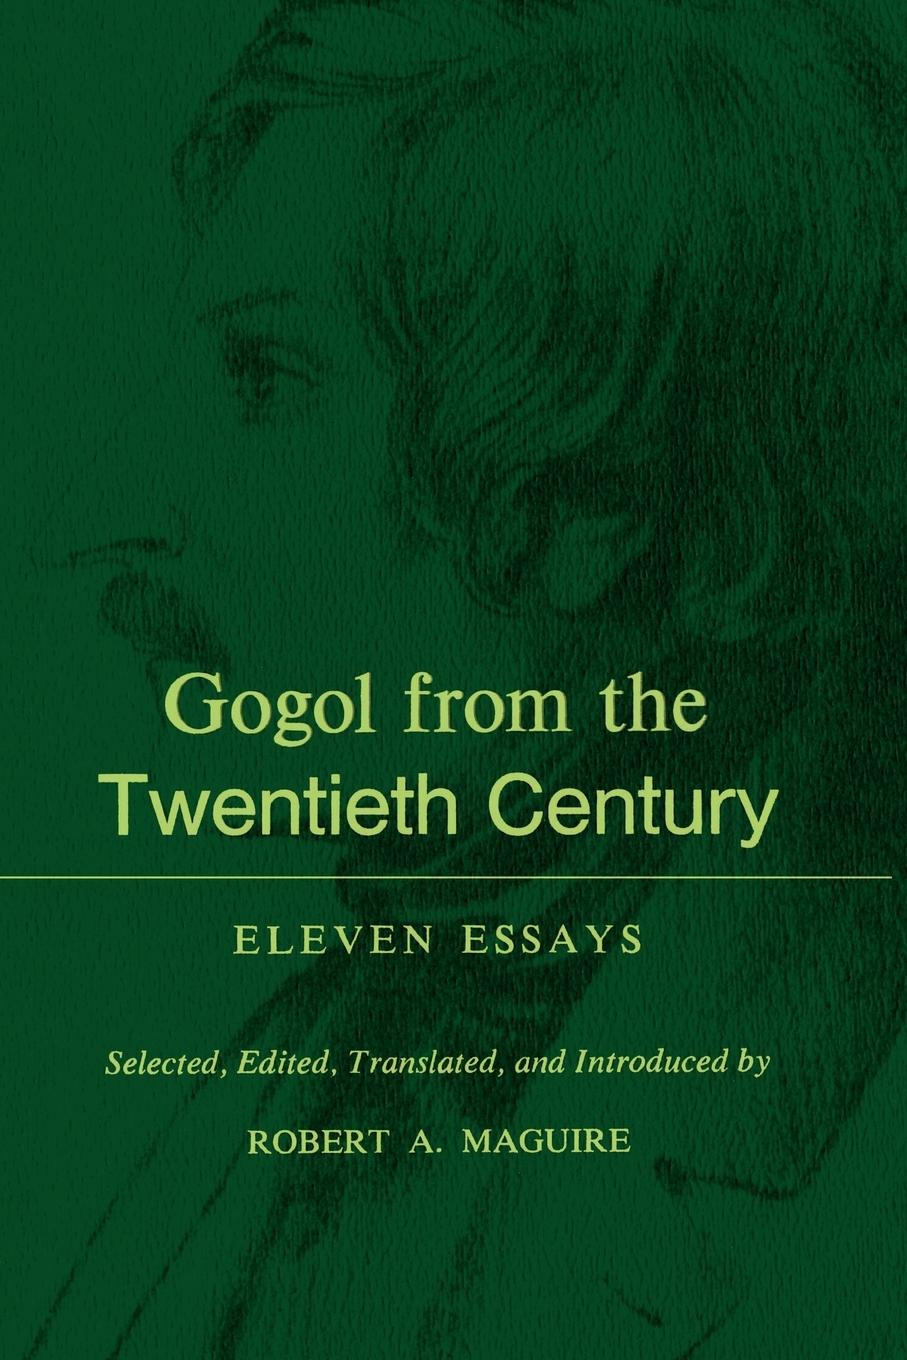 Gogol From the Twentieth Century - Maguire, Robert A.